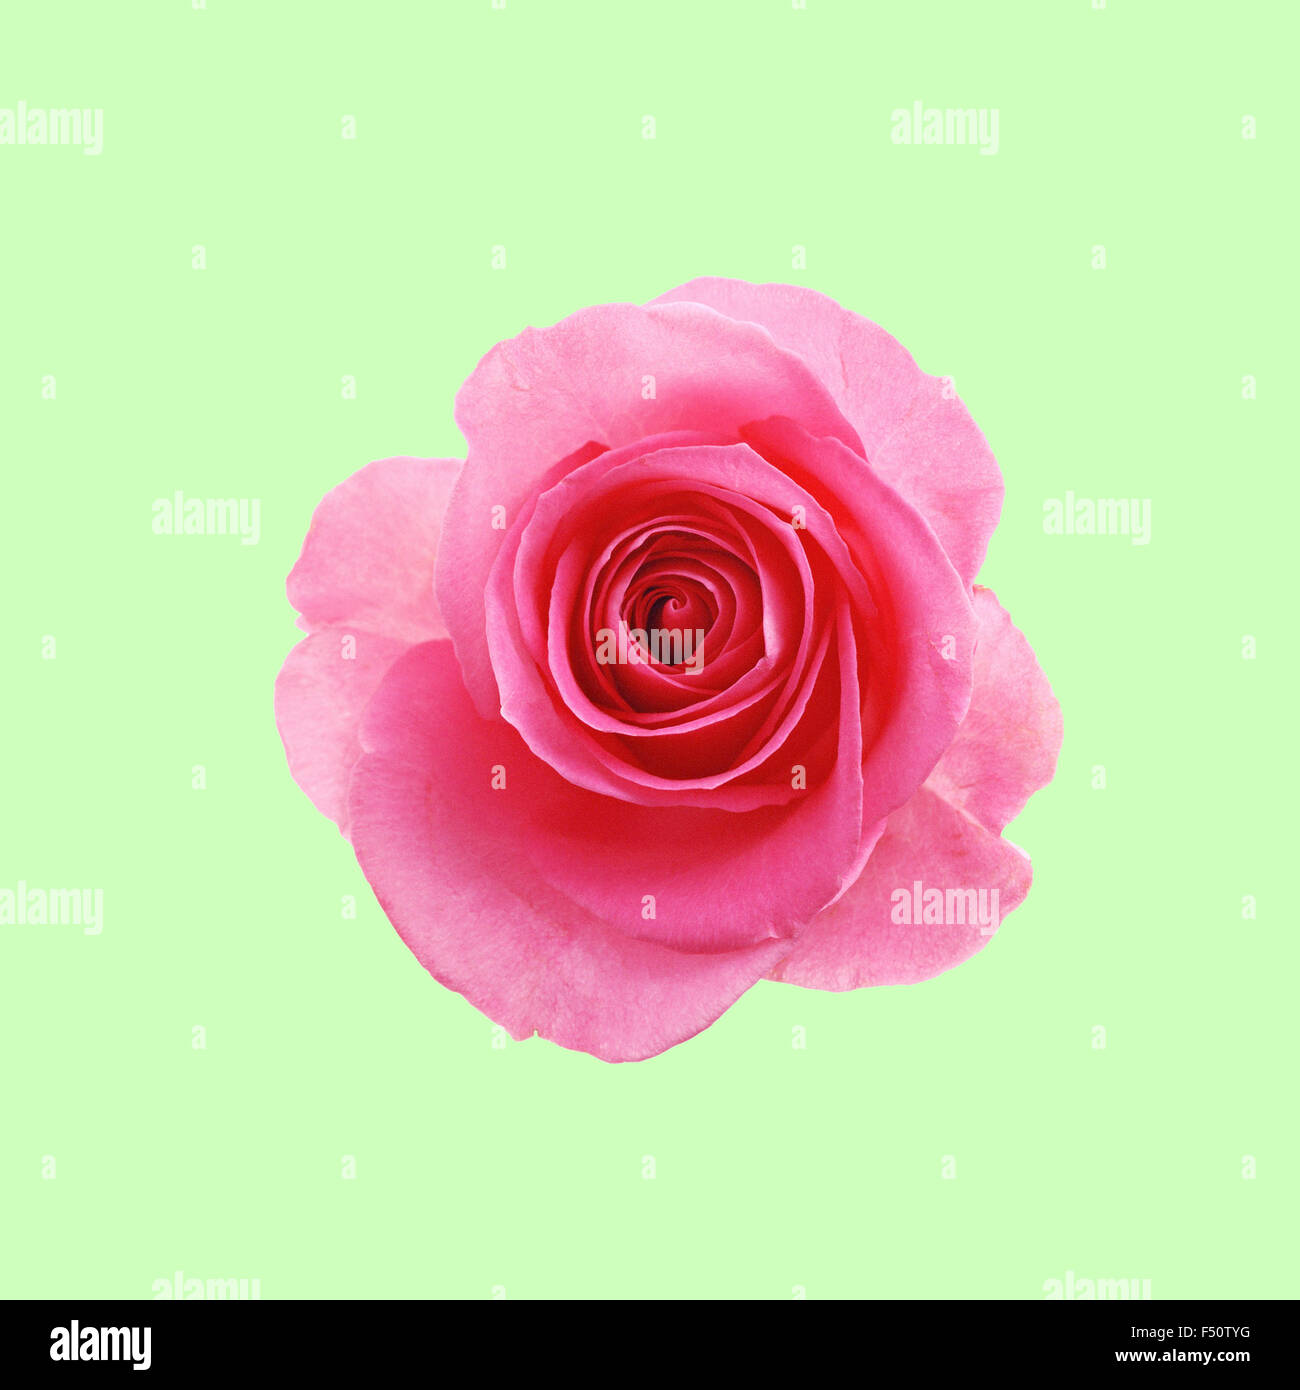 Pink rose flower on the mint green background Stock Photo